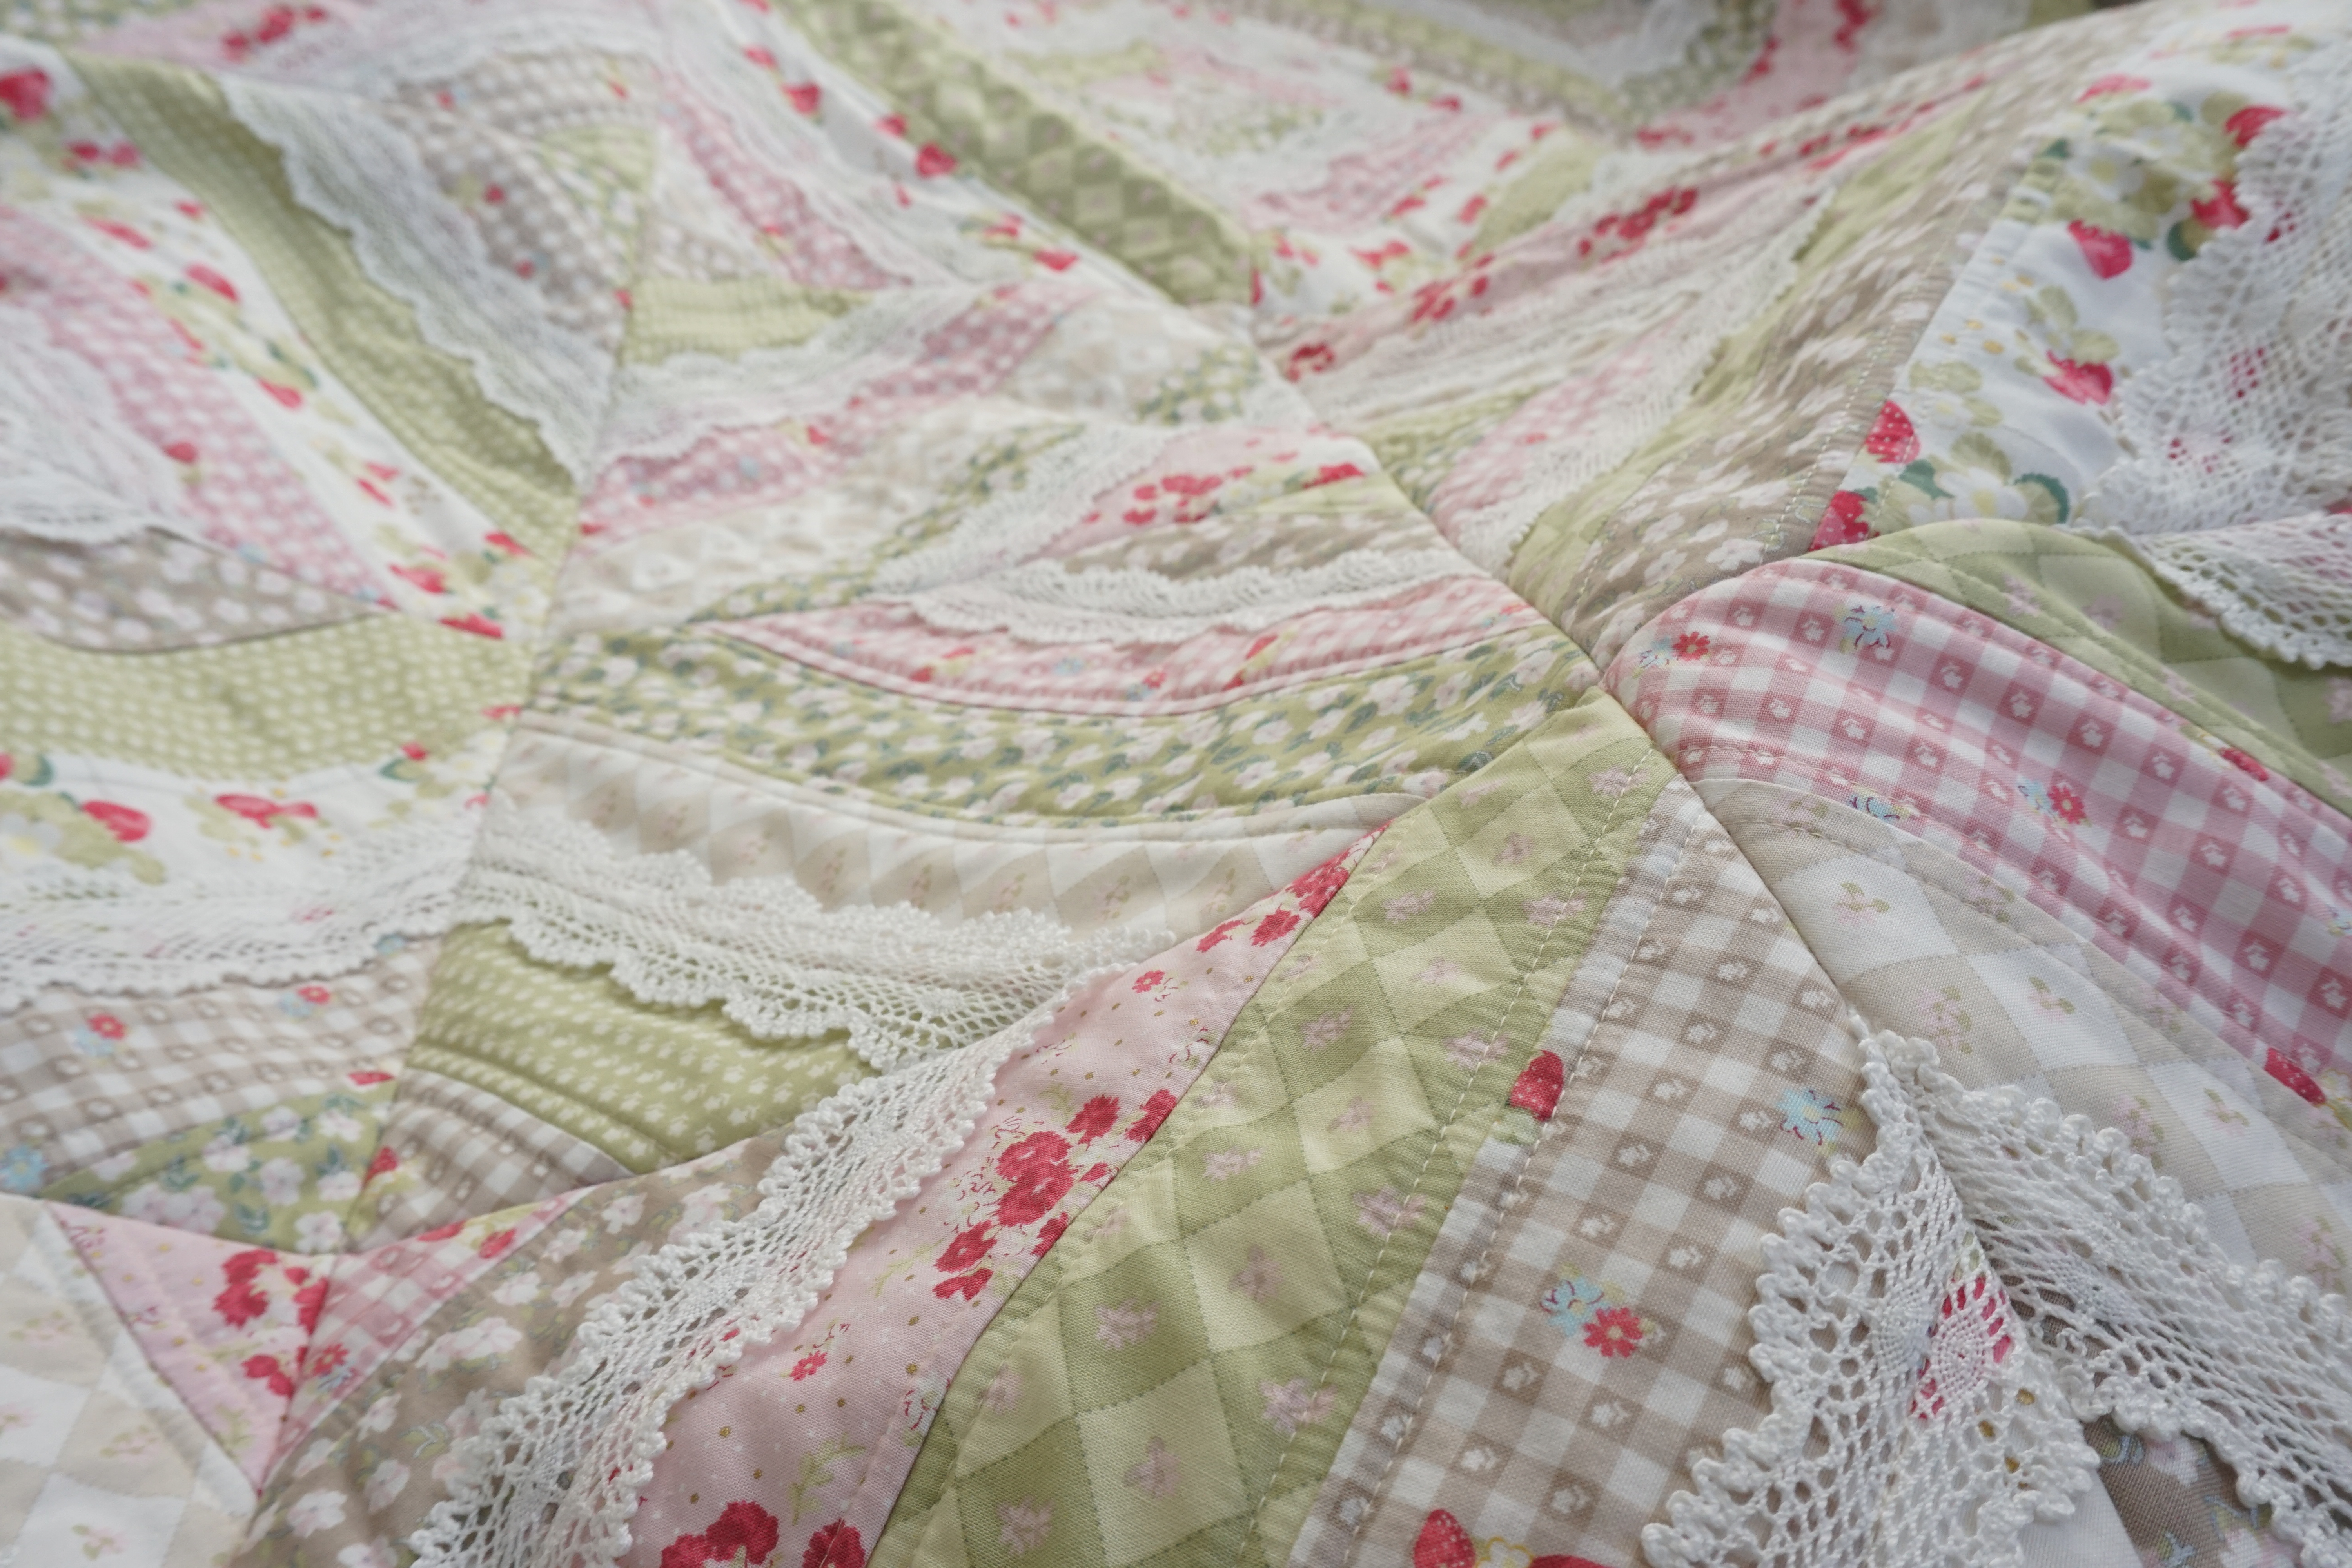 Quilt-As-You-Go Made Modern – Strip Quilt with Lace tutorial!